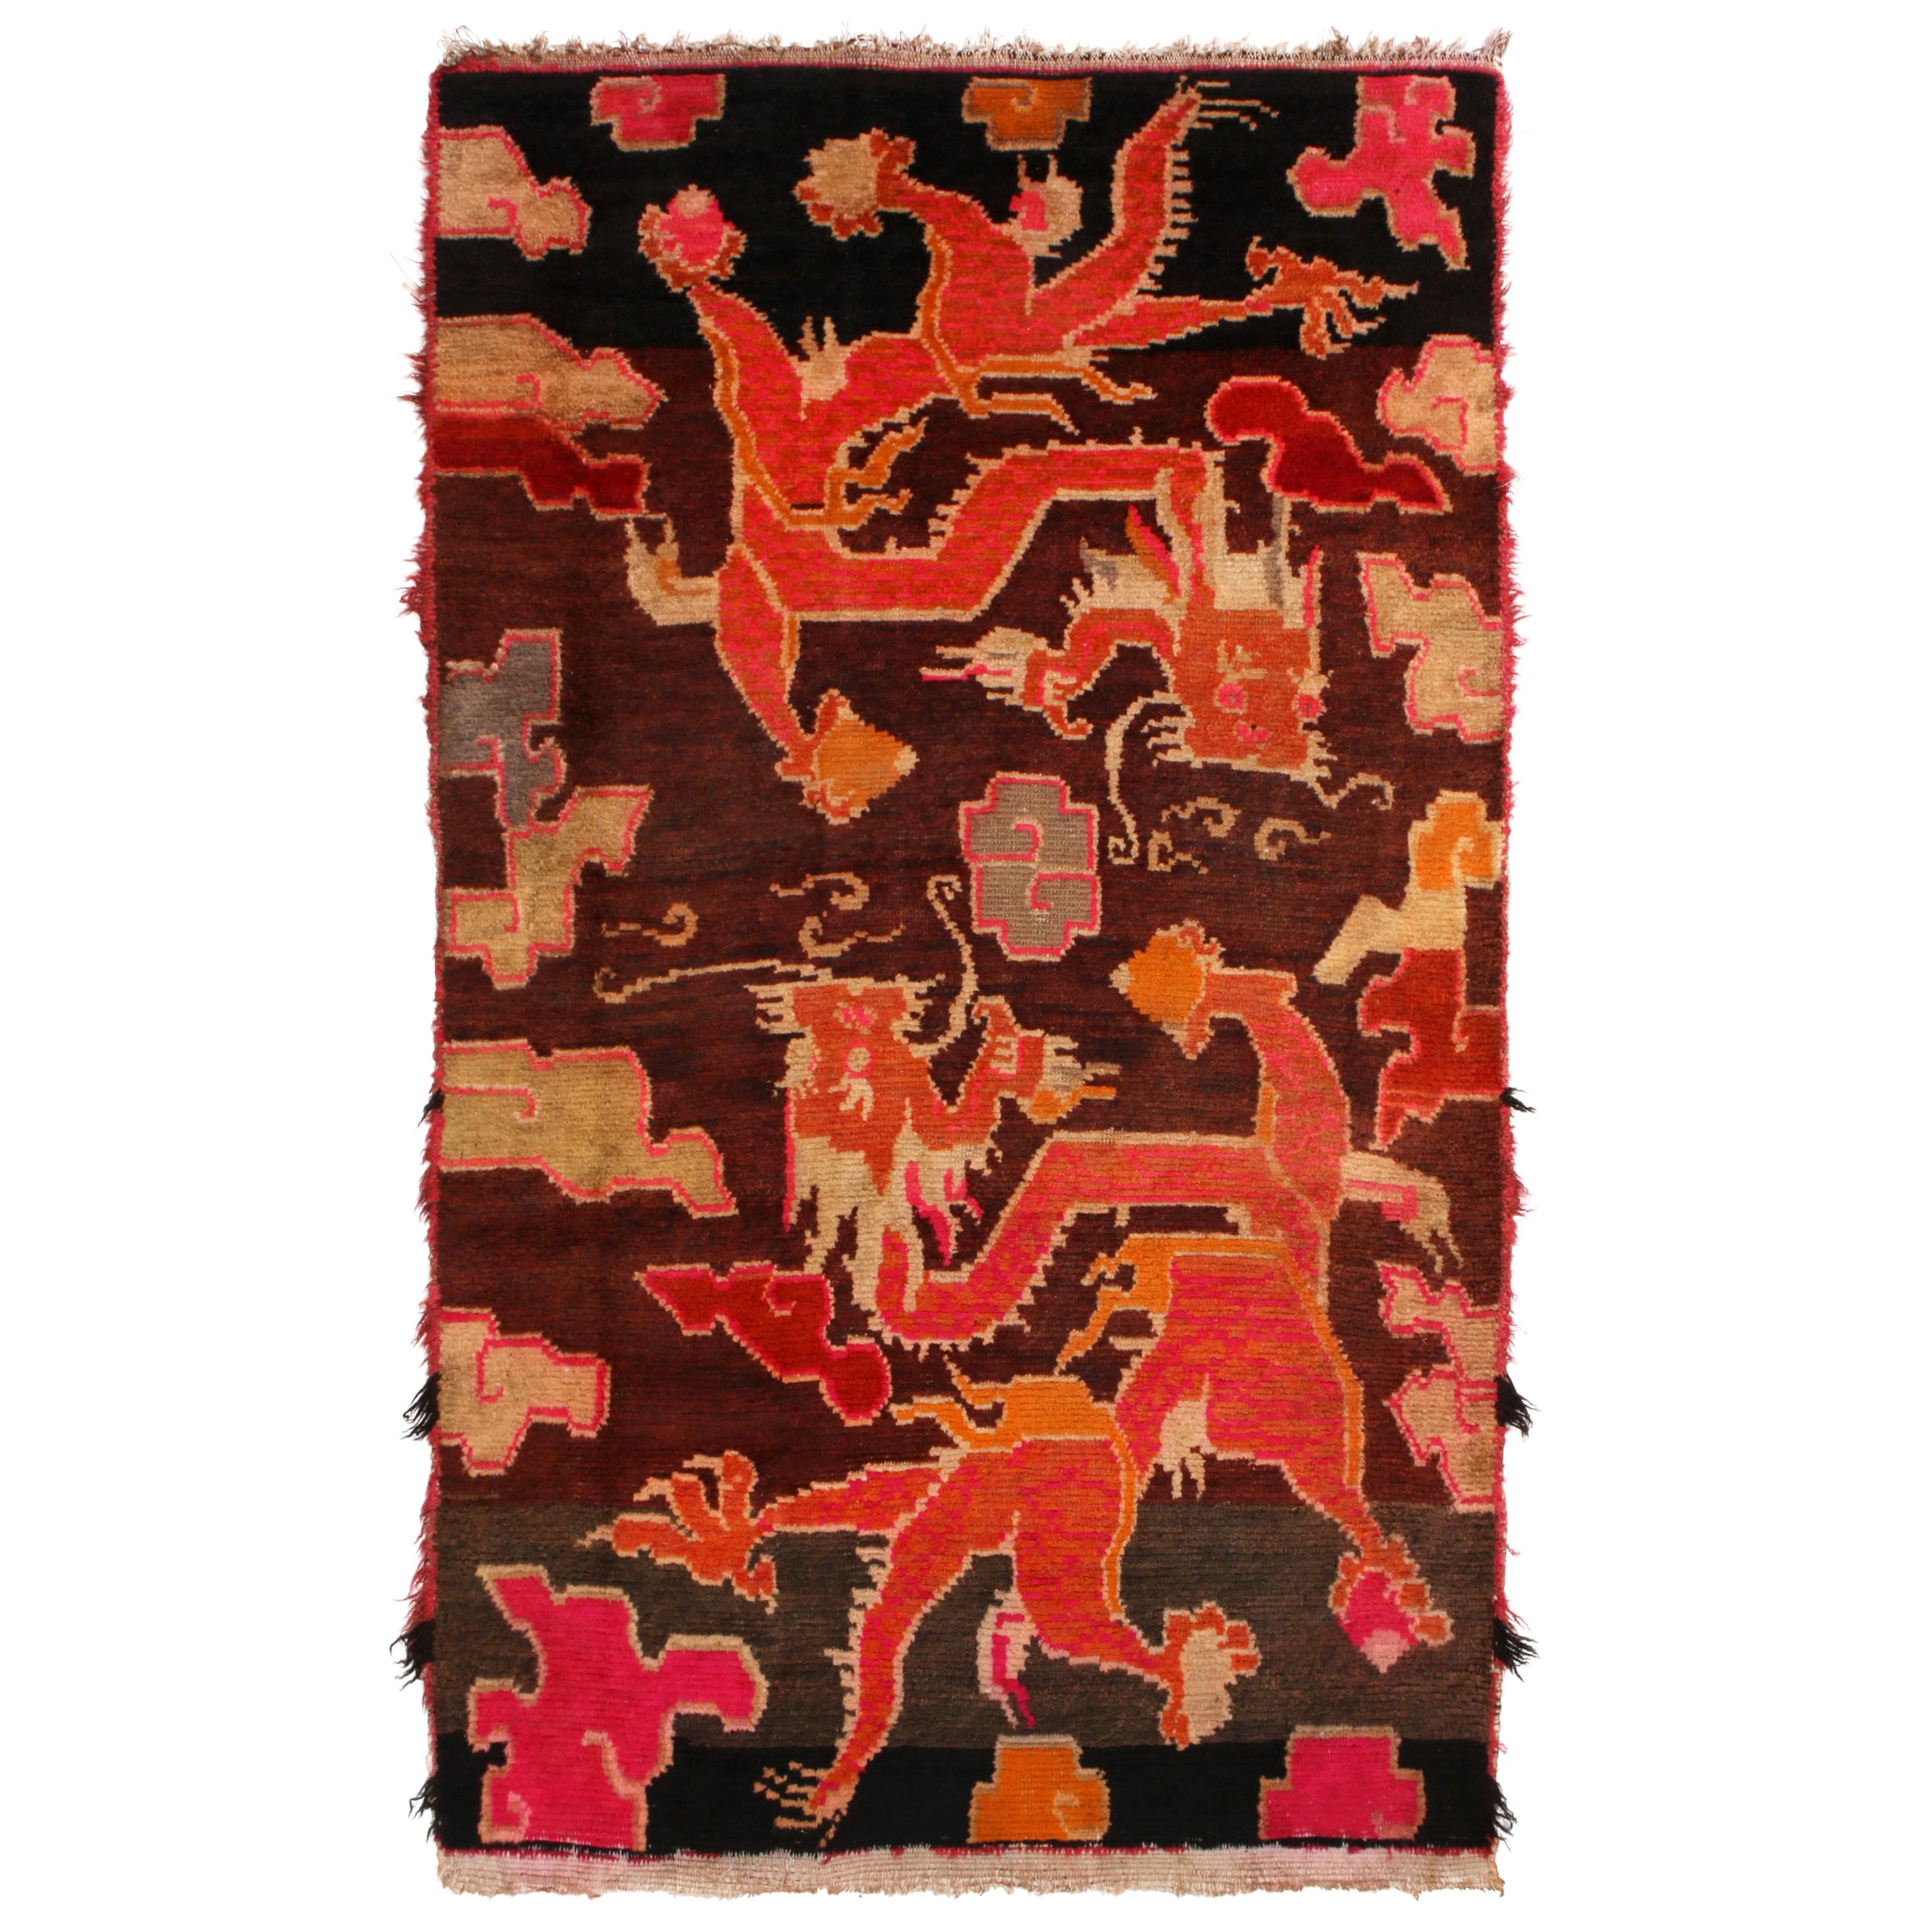 Antique Tibetan Orange and Brown Wool Rug with Dragon and Cloud Motifs